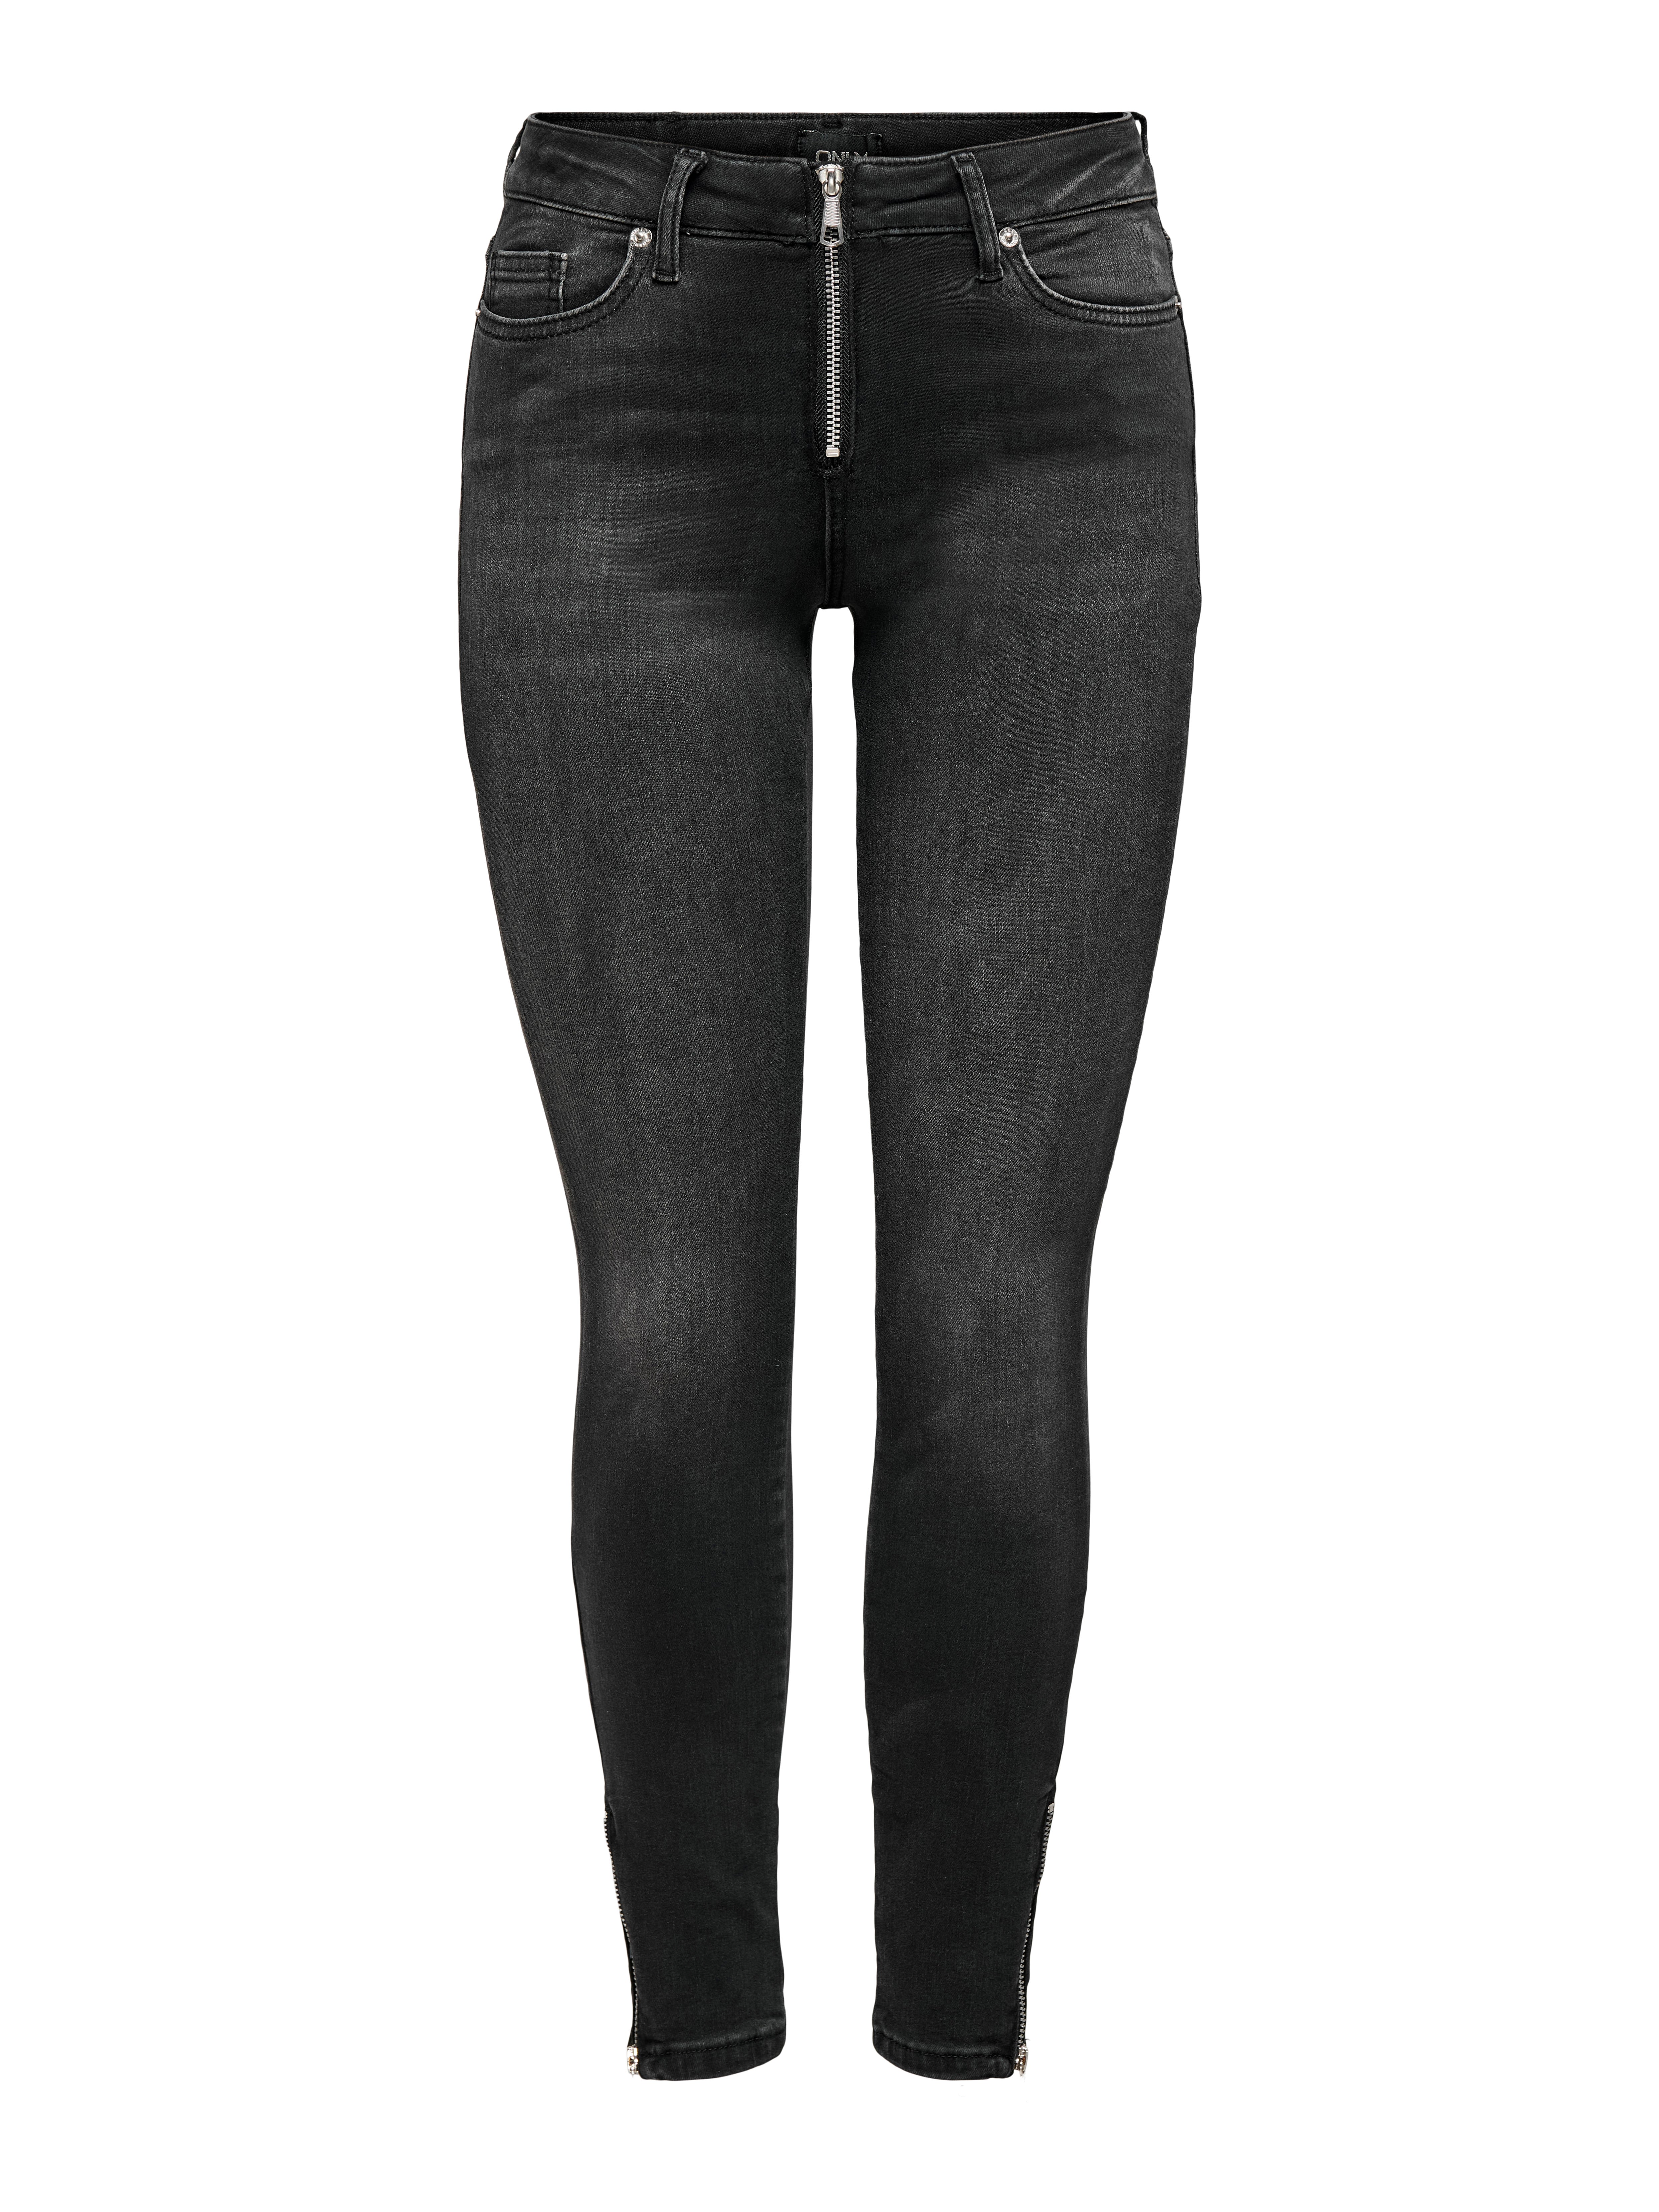 Skinny Fit Mid waist Zip detail at leg opening Jeans with 20% discount!